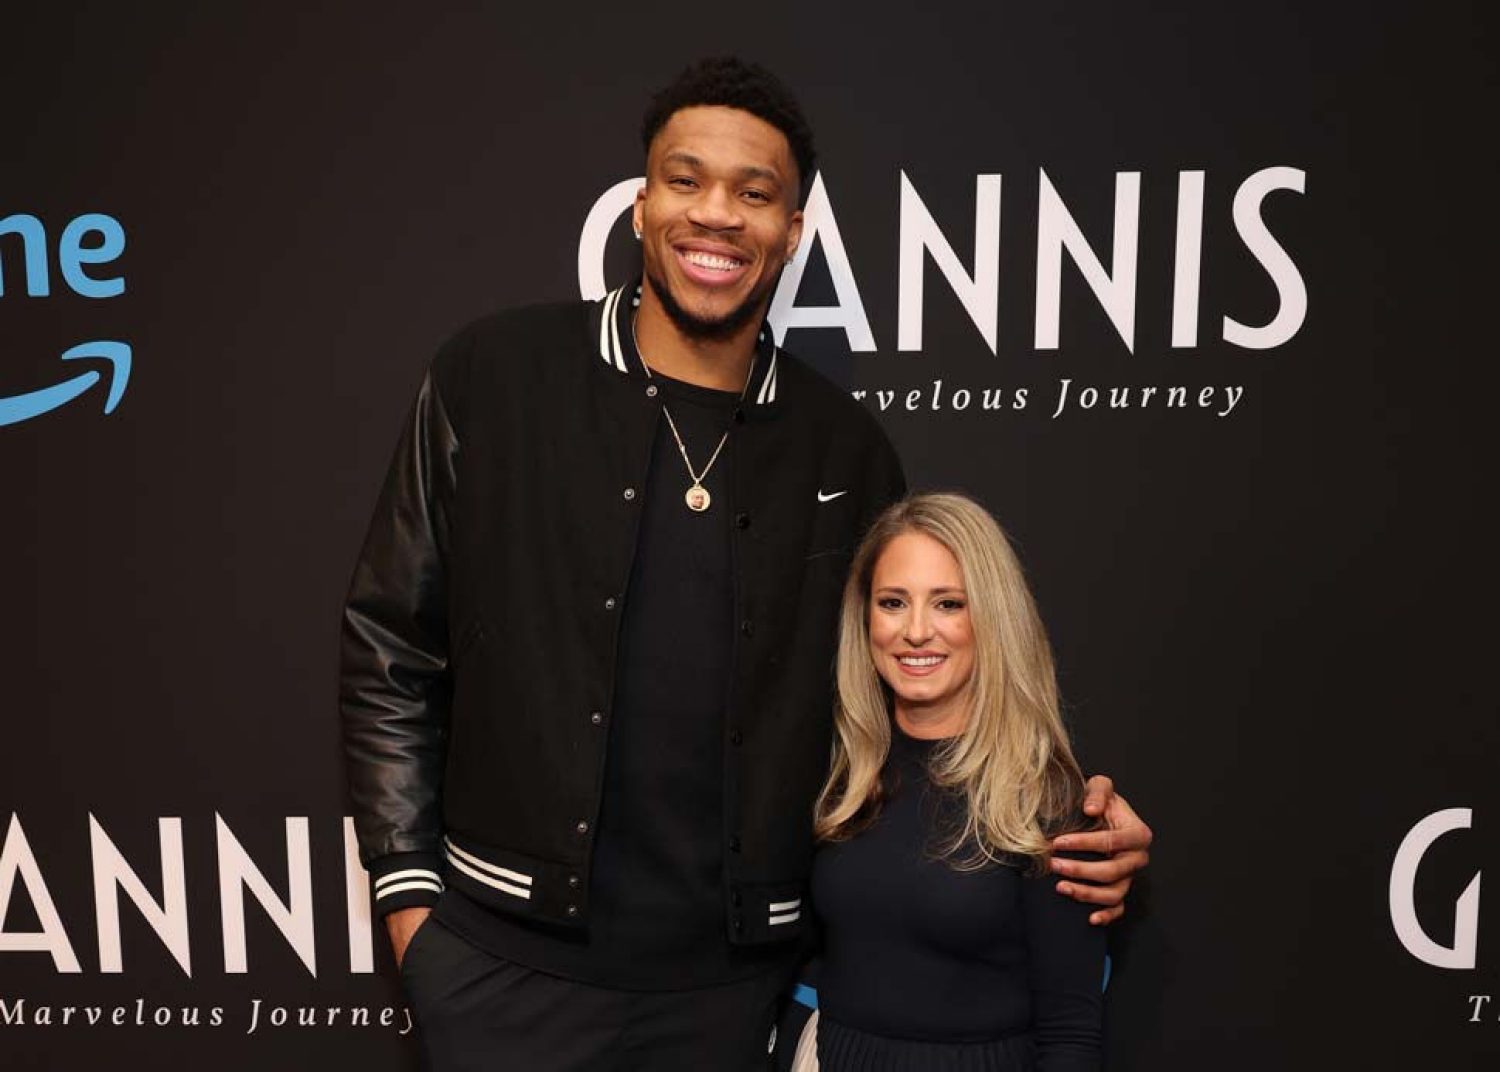 Giannis Antetokounmpo and Kristen Lappas standing together at premiere.